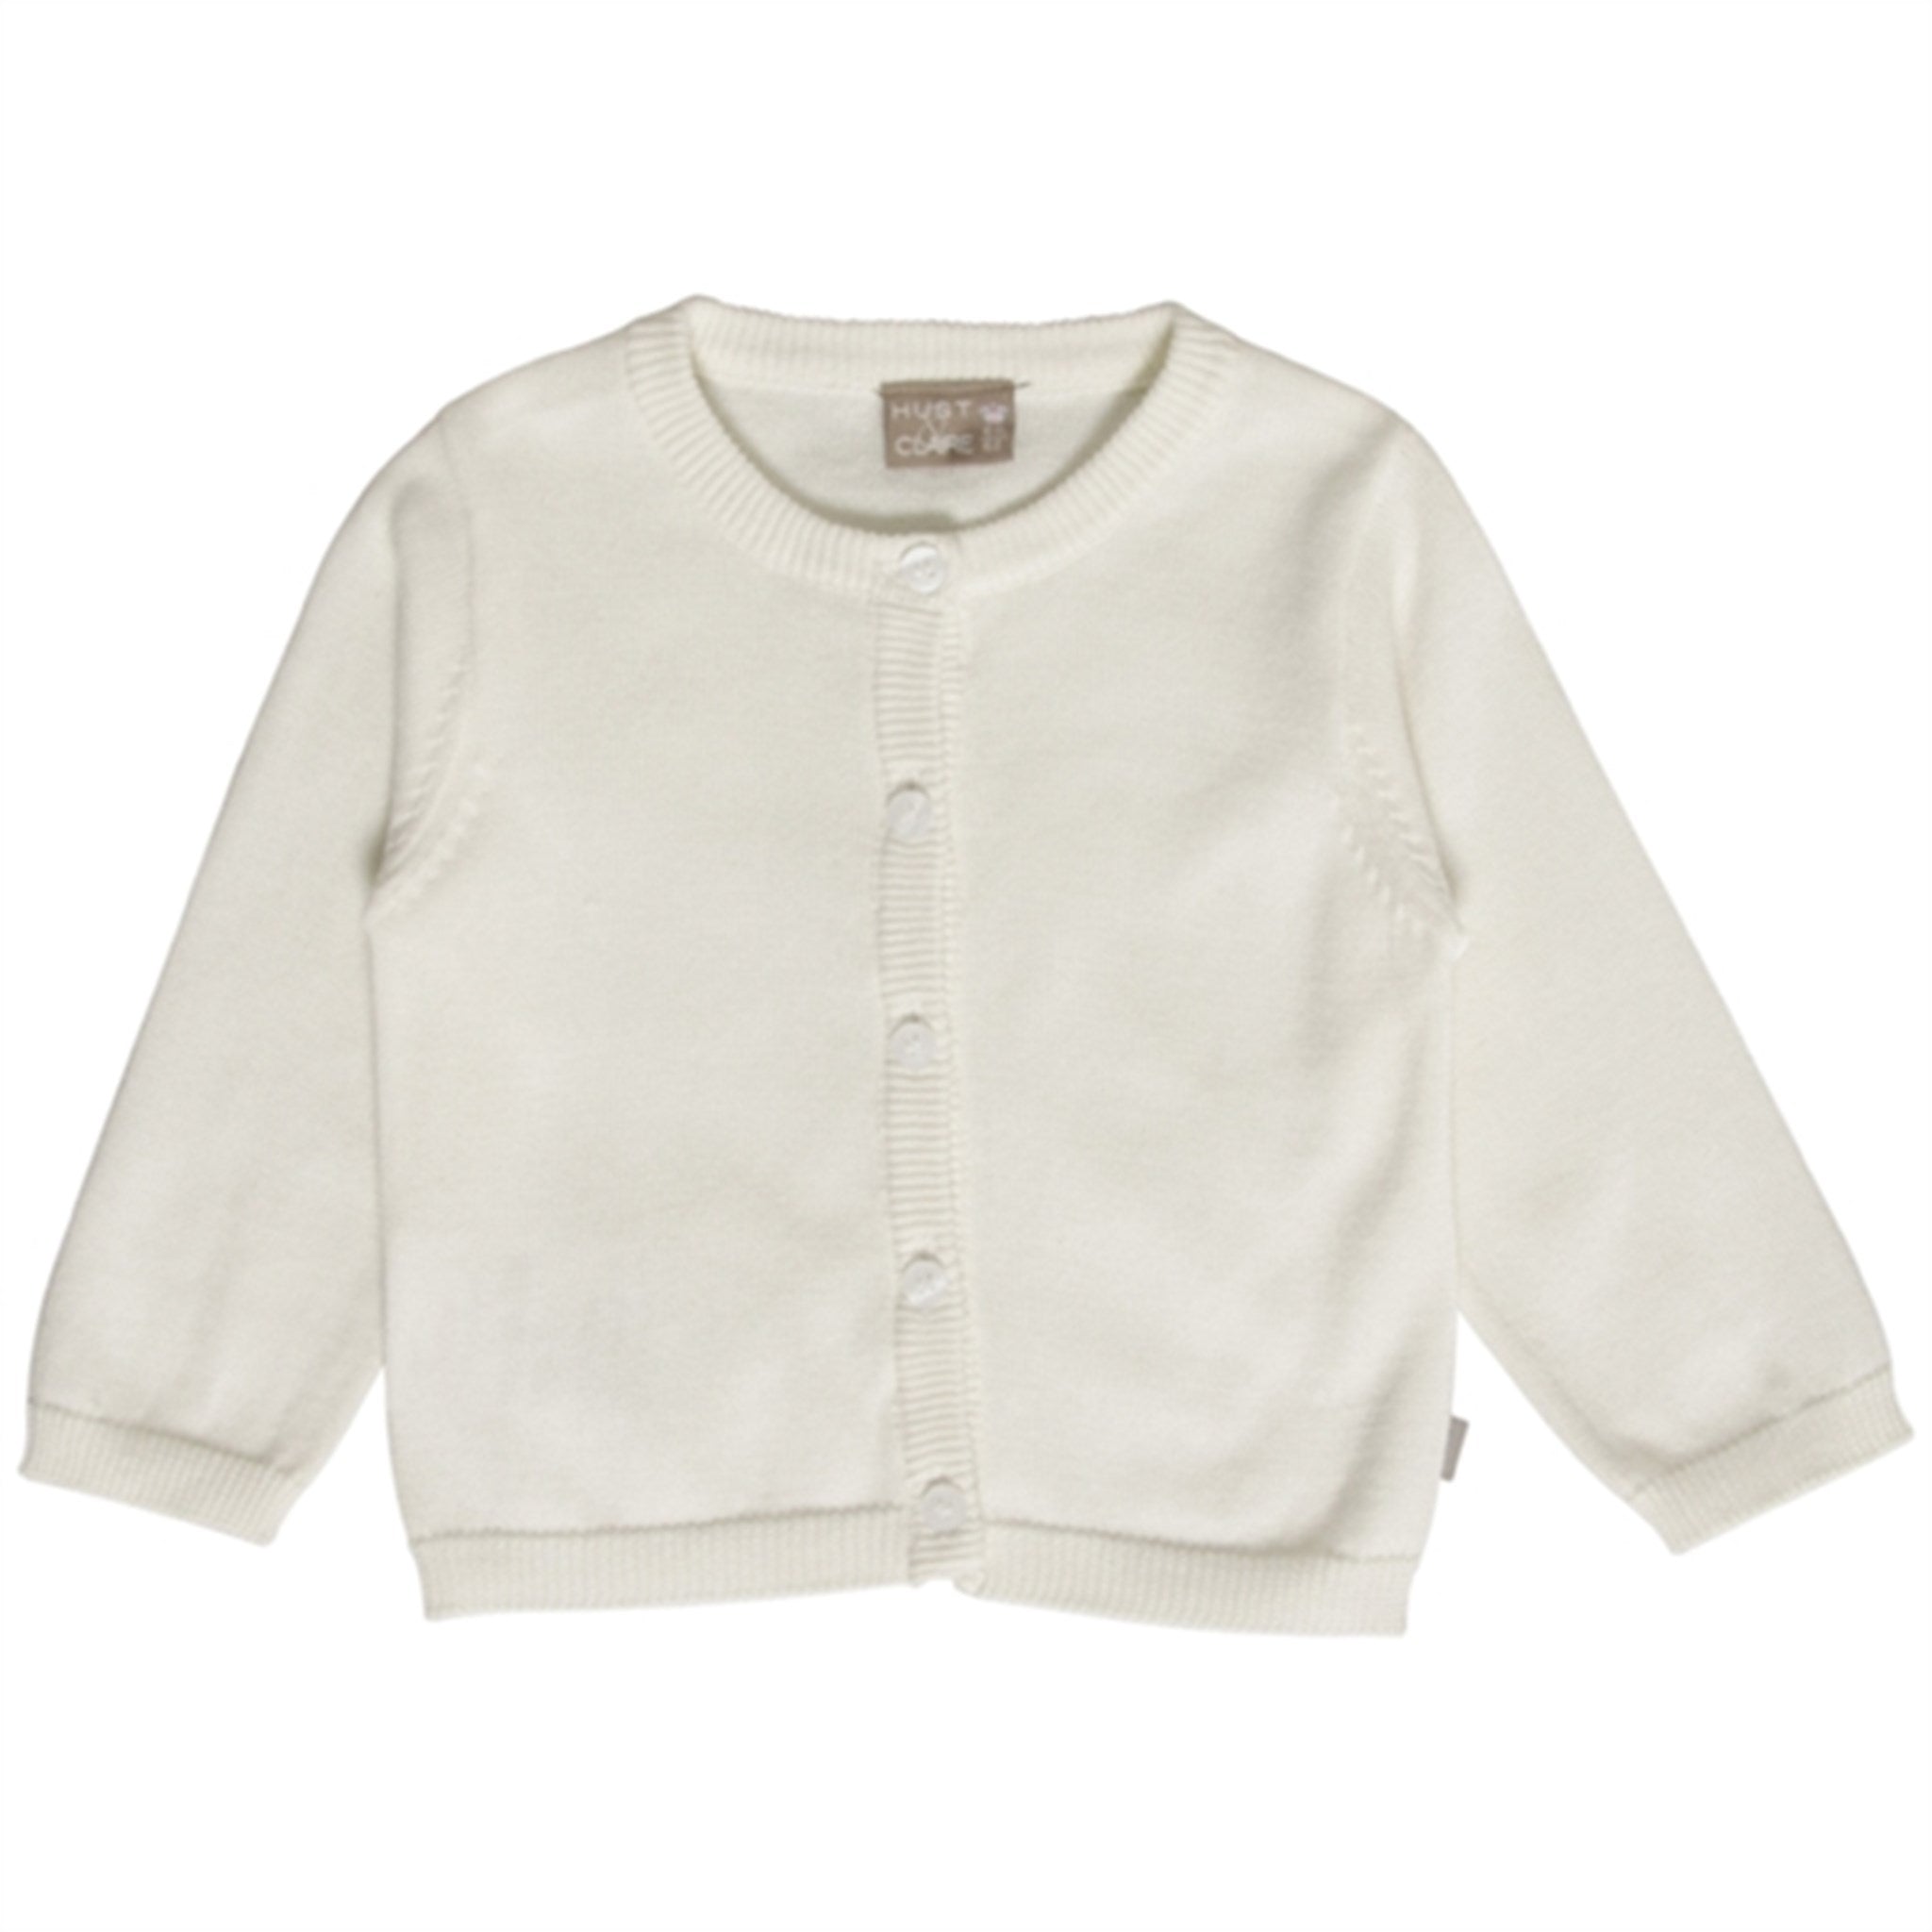 Hust & Claire Baby Ivory Claire Cardigan NOOS - Str. 80 cm